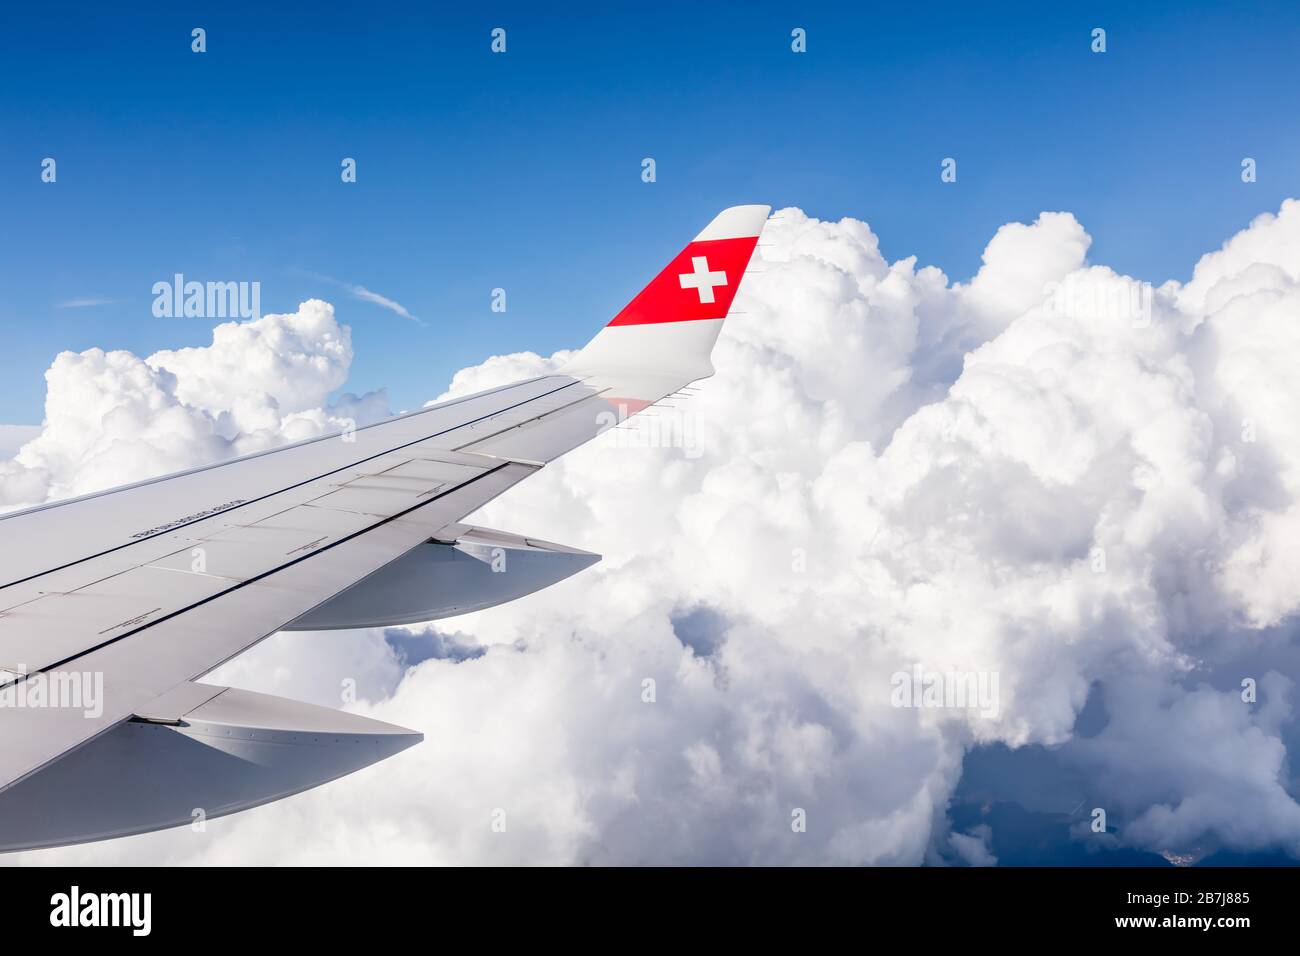 Swiss airline wing in the sky Stock Photo